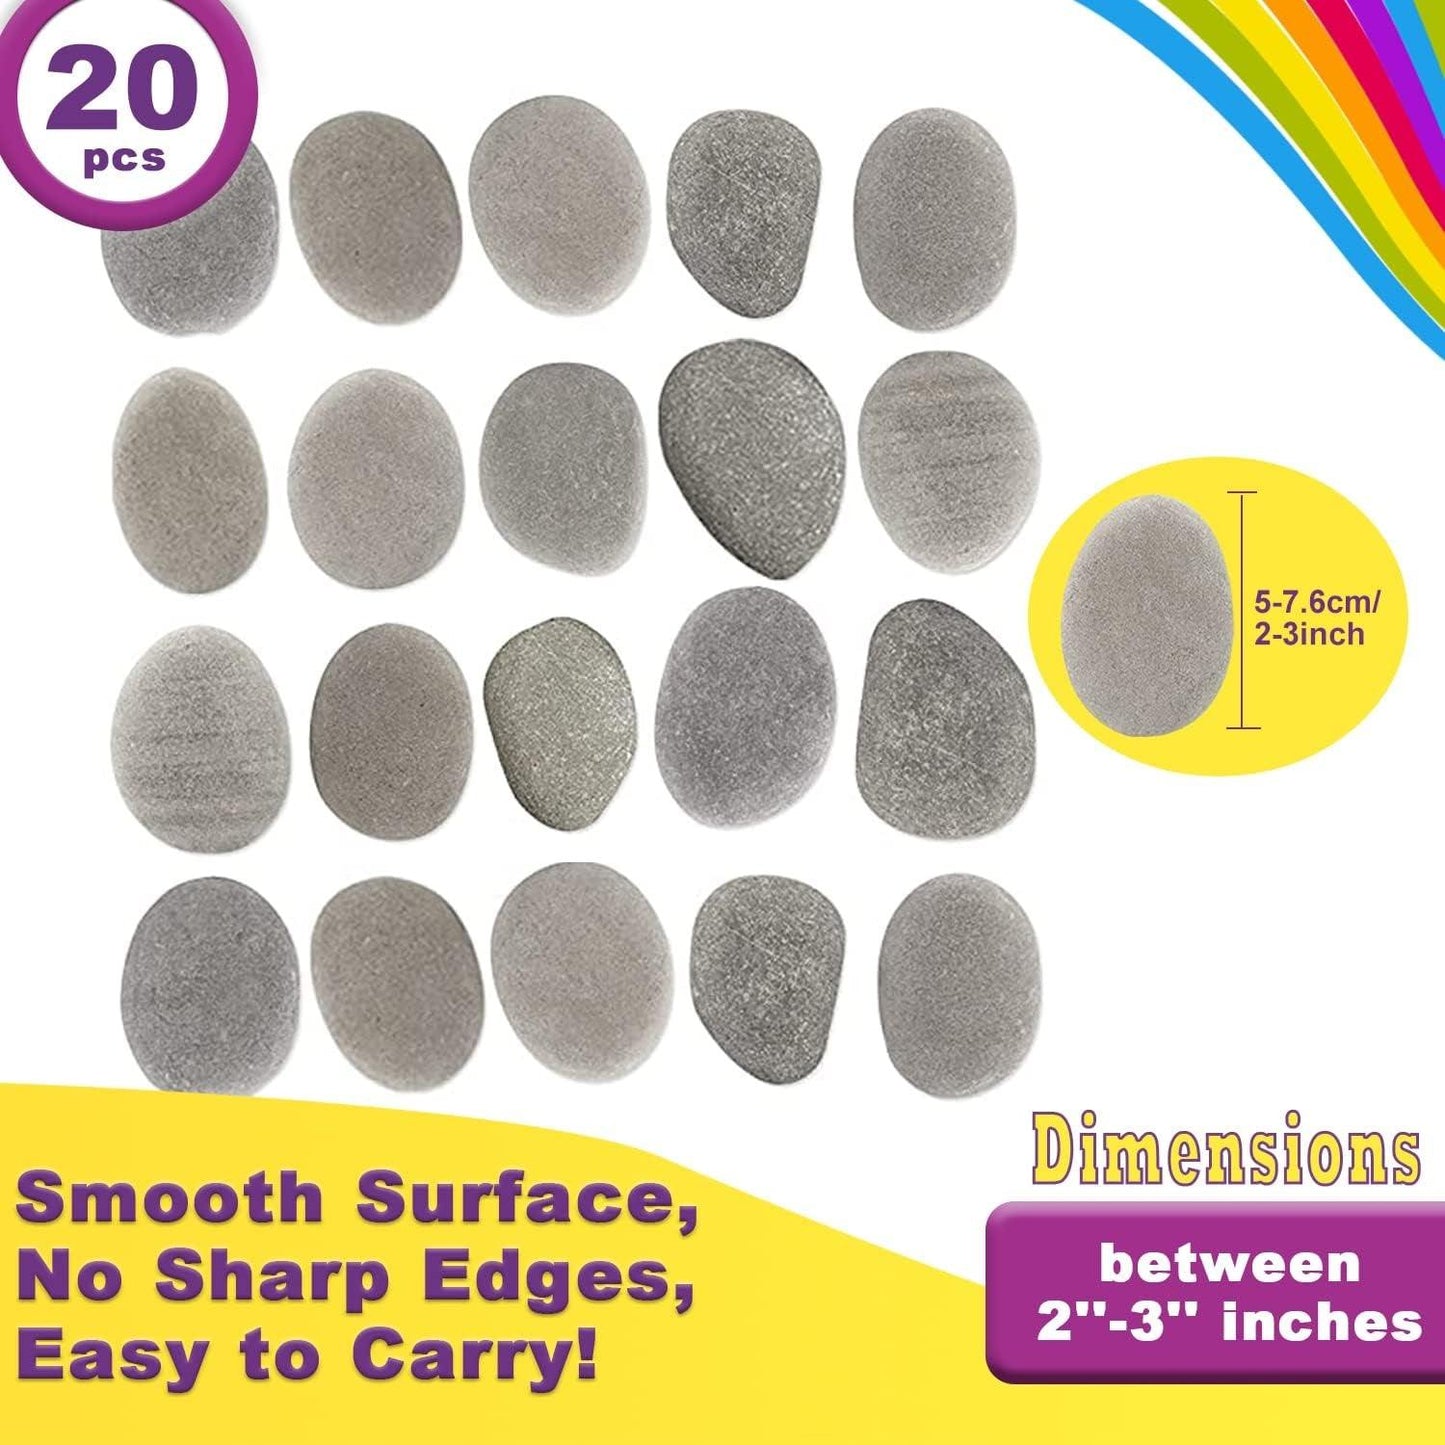 20PCS River Rocks for Painting, 4Th of July Decorations for Home, DIY & Smooth - WoodArtSupply